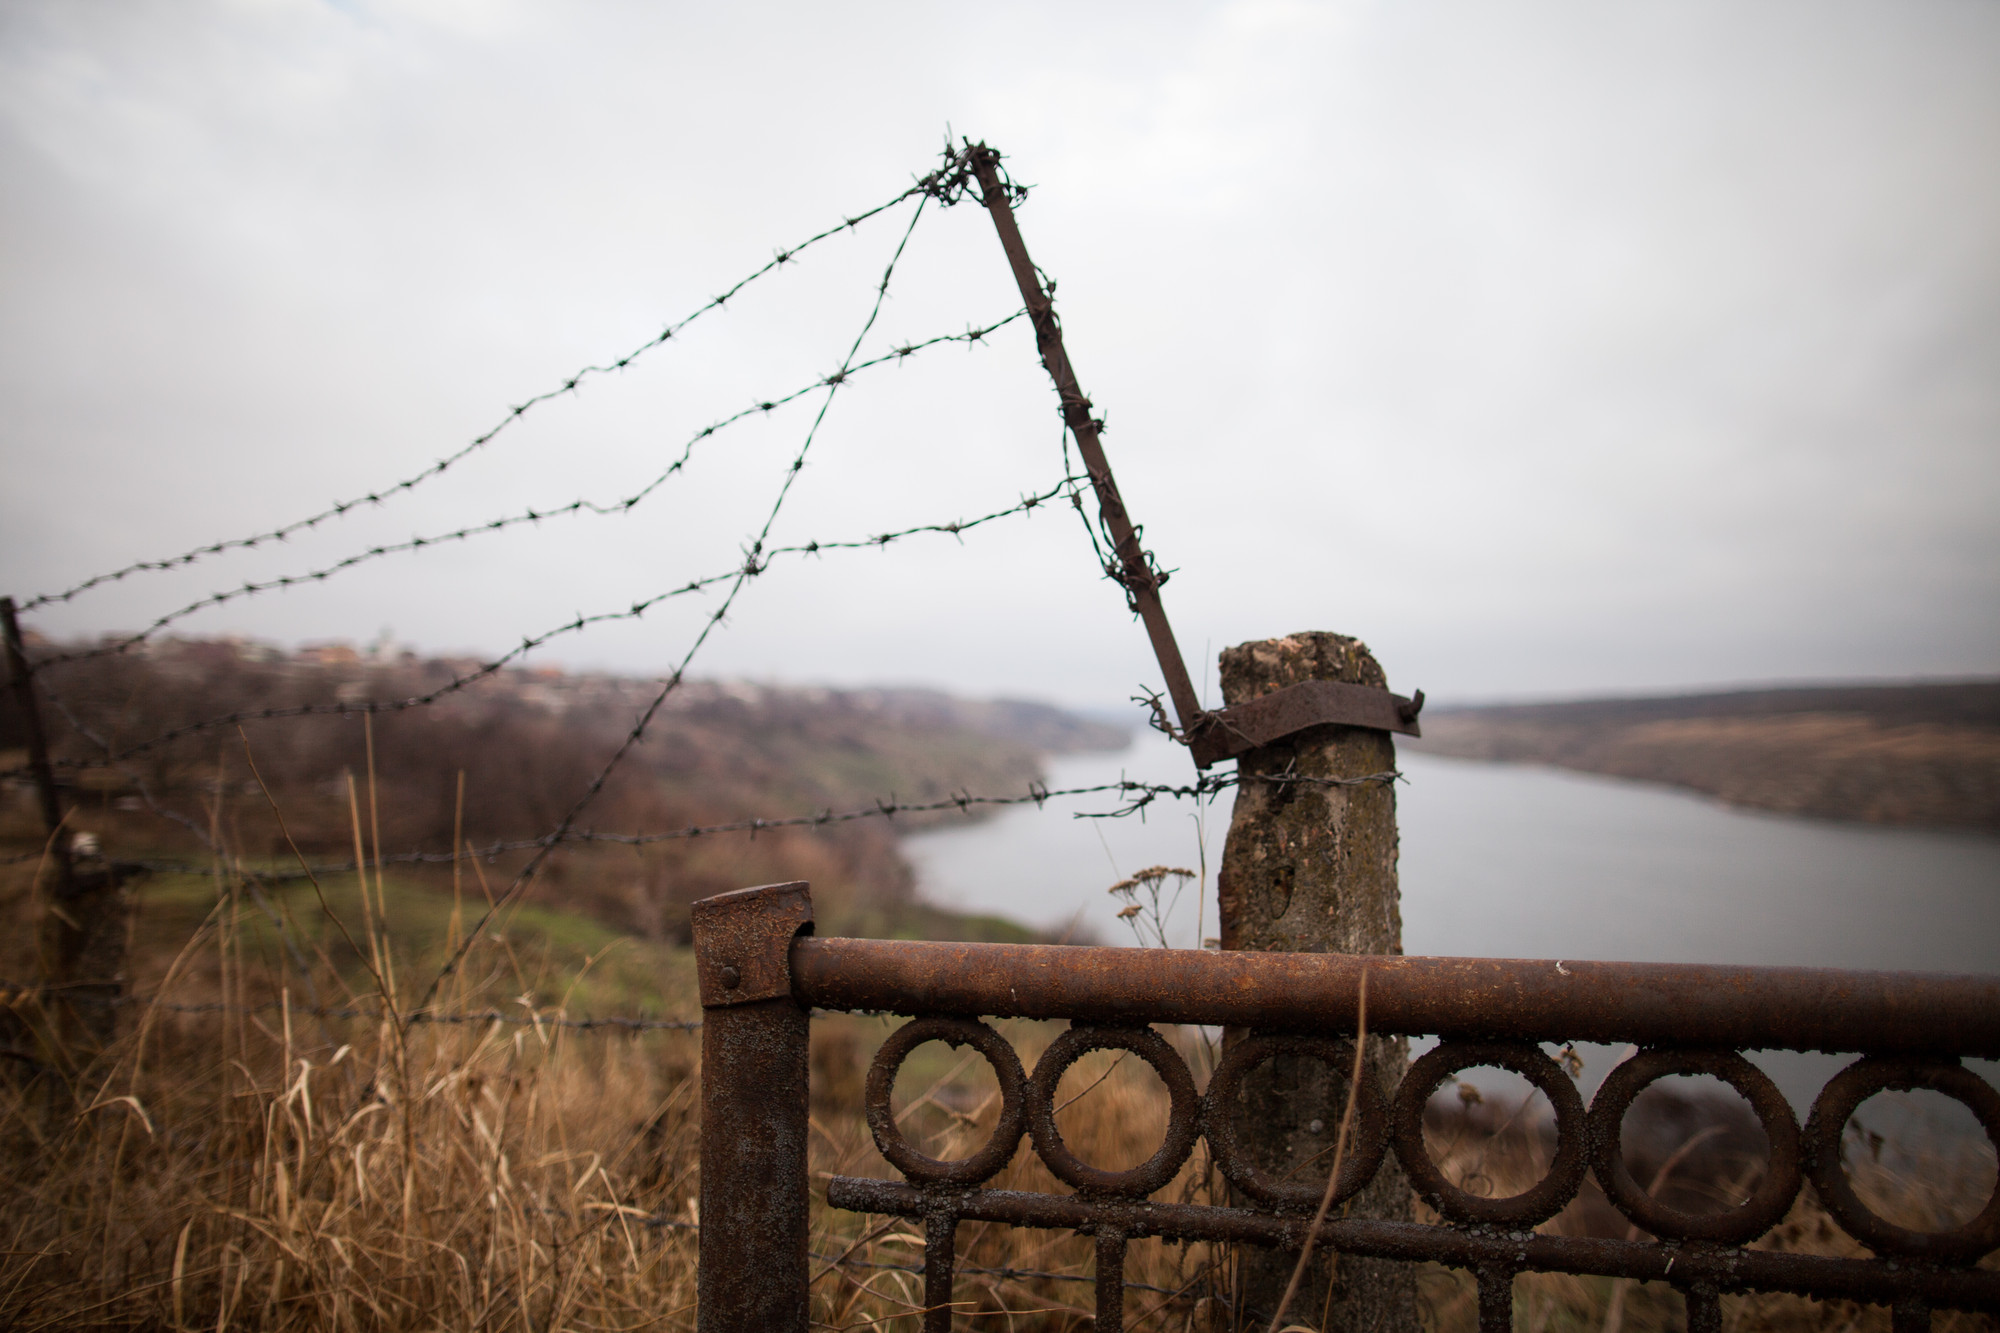 A barbed wire fence near a river